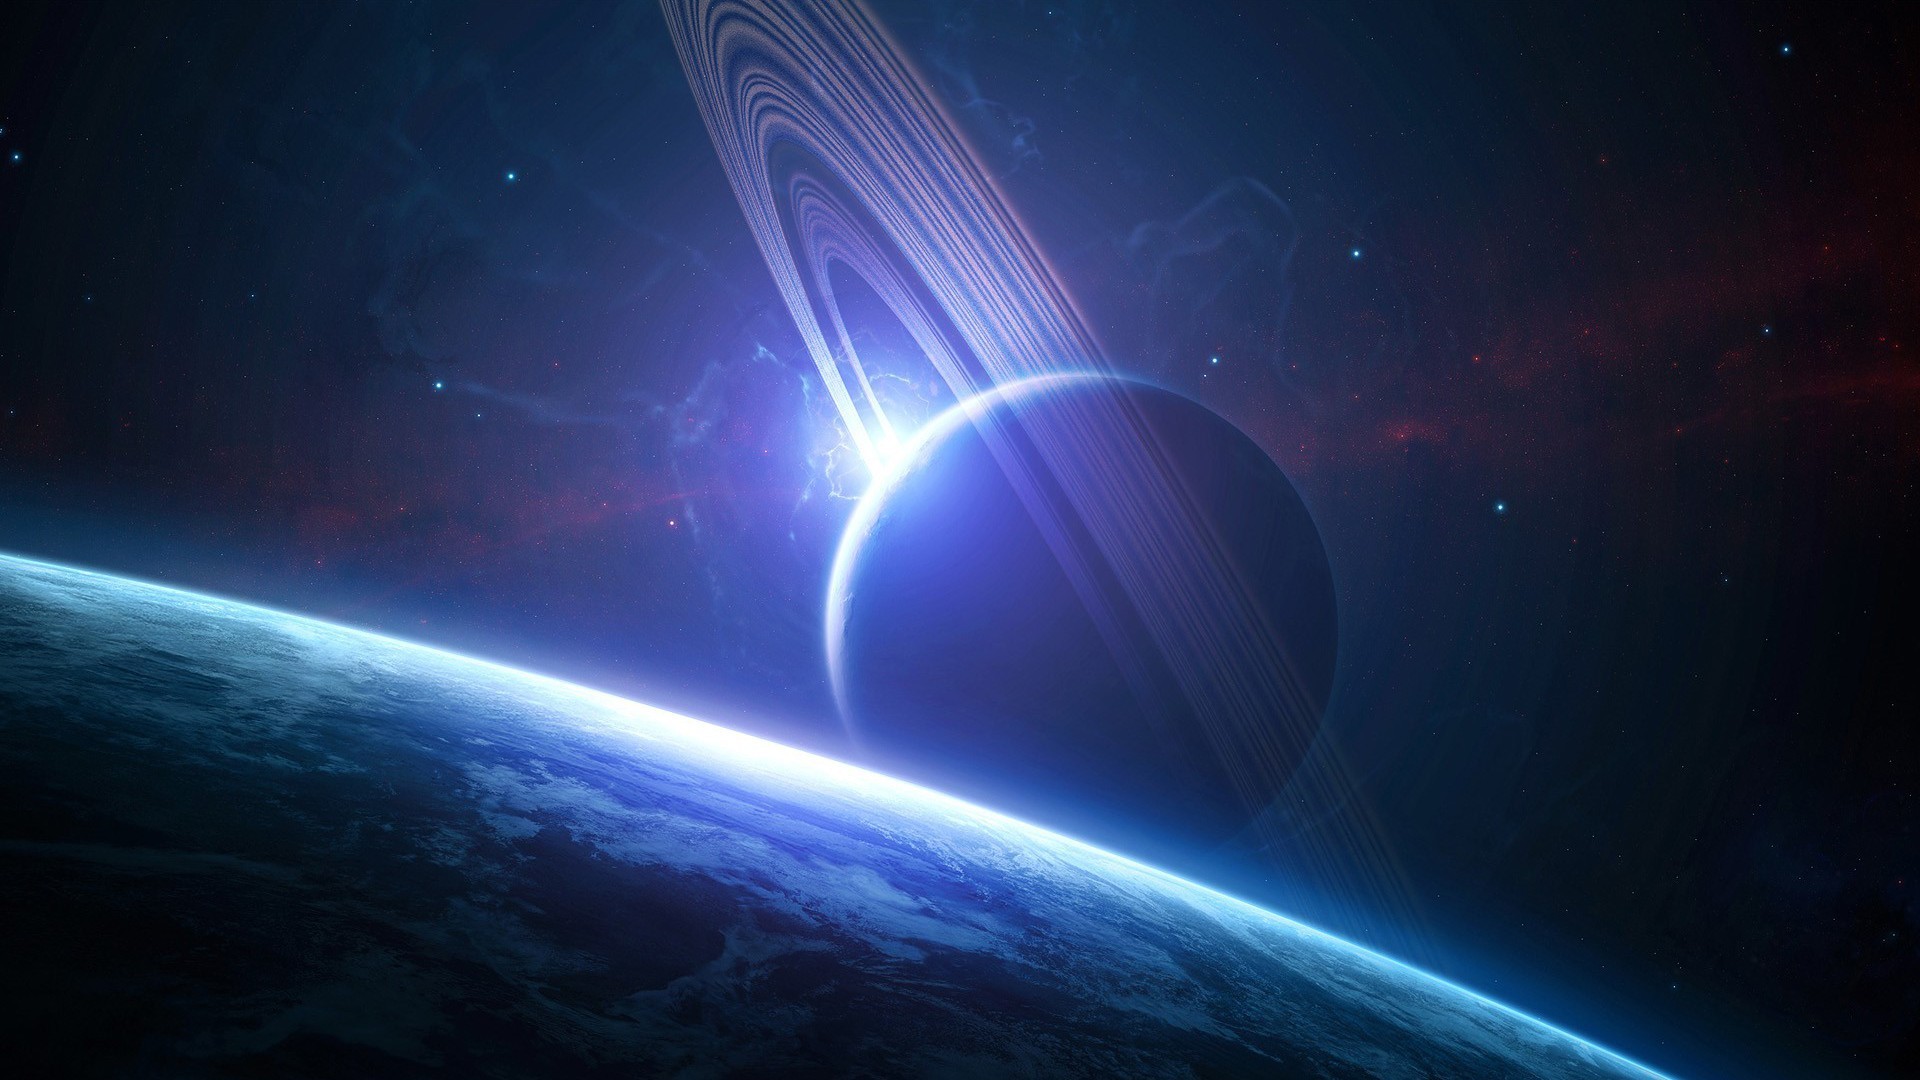 Wallpapers space radiance planets on the desktop